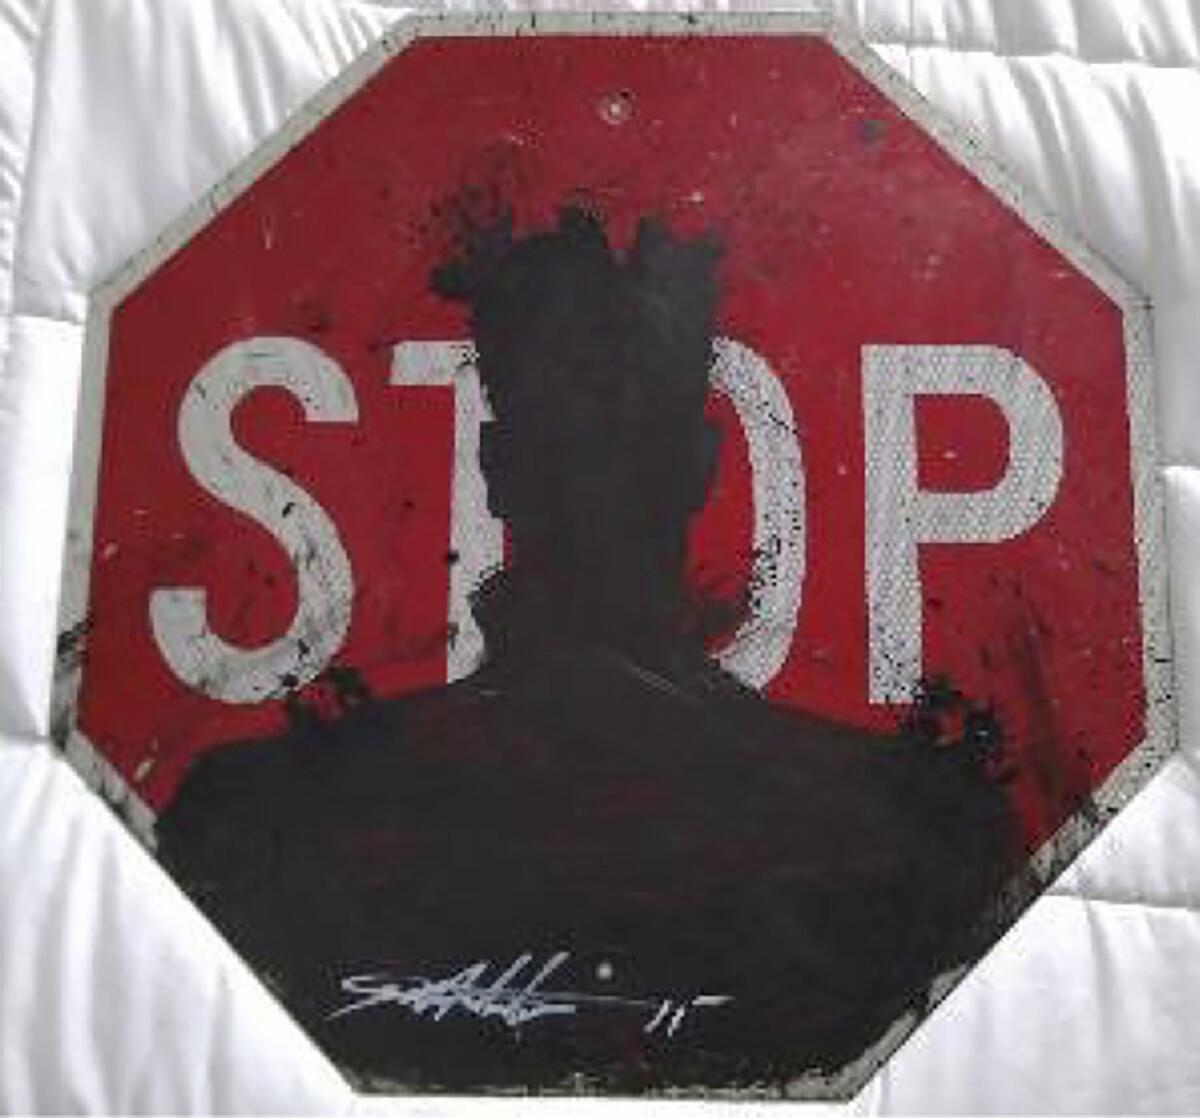 A painting of a stop sign with a silhouette of a person's head and shoulders 